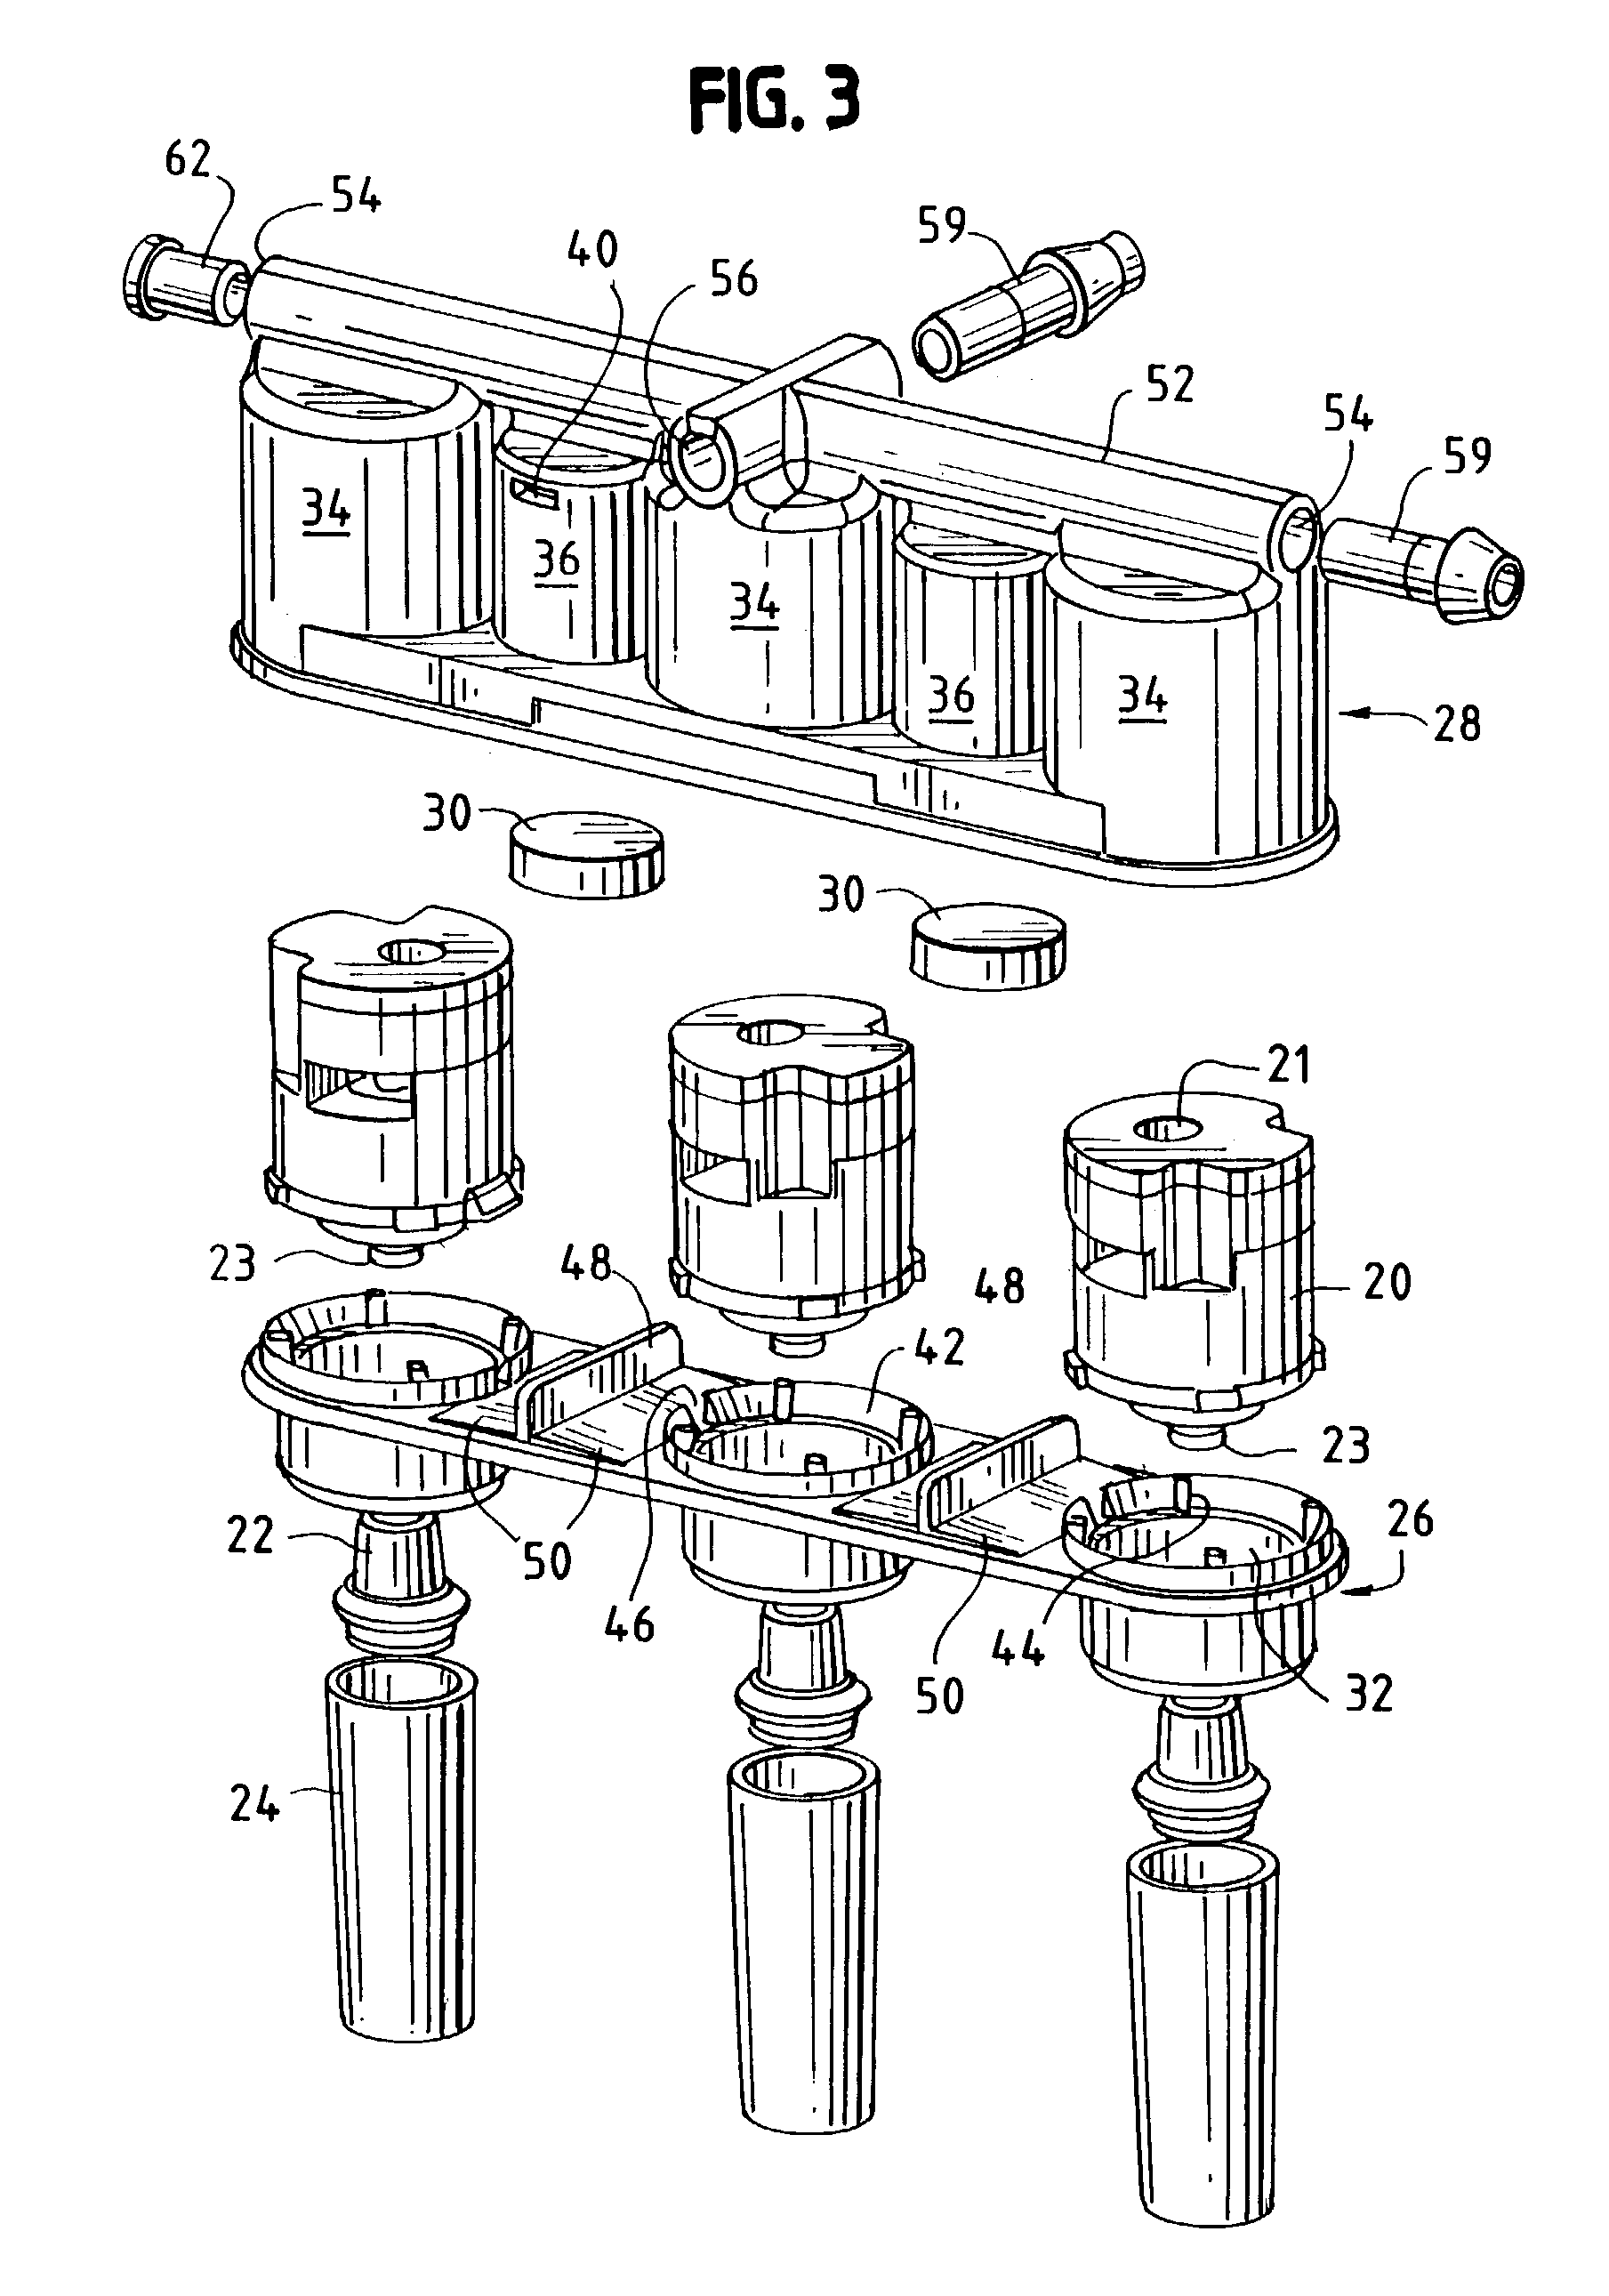 Single point watering apparatus for lead-acid battery